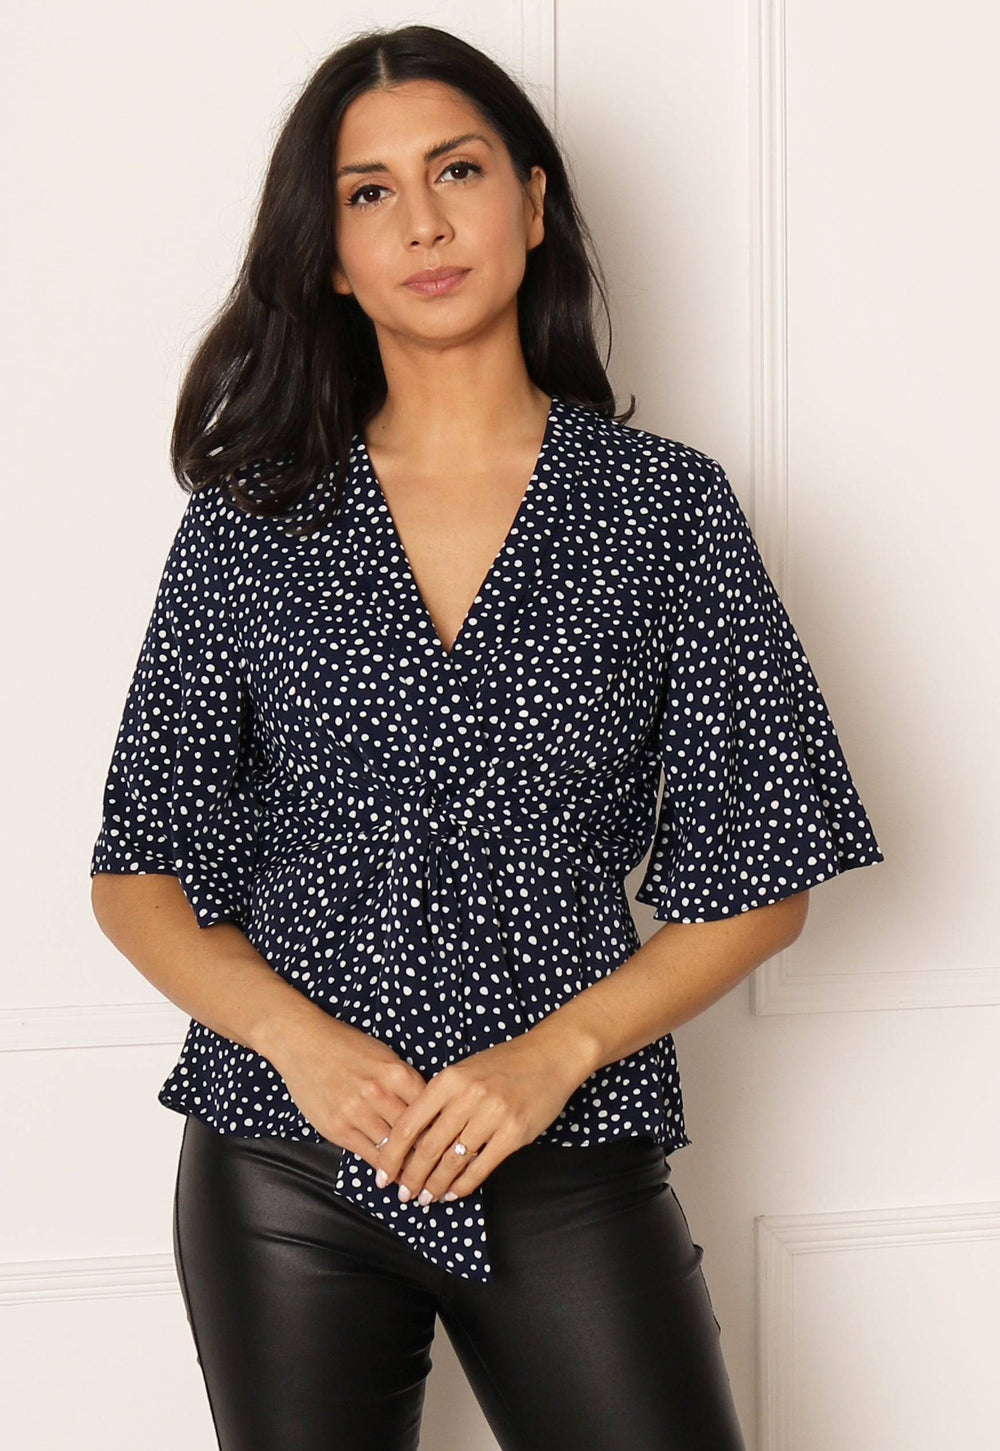 Kimono Sleeve Knot Detail Blouse Top in Navy & White - One Nation Clothing